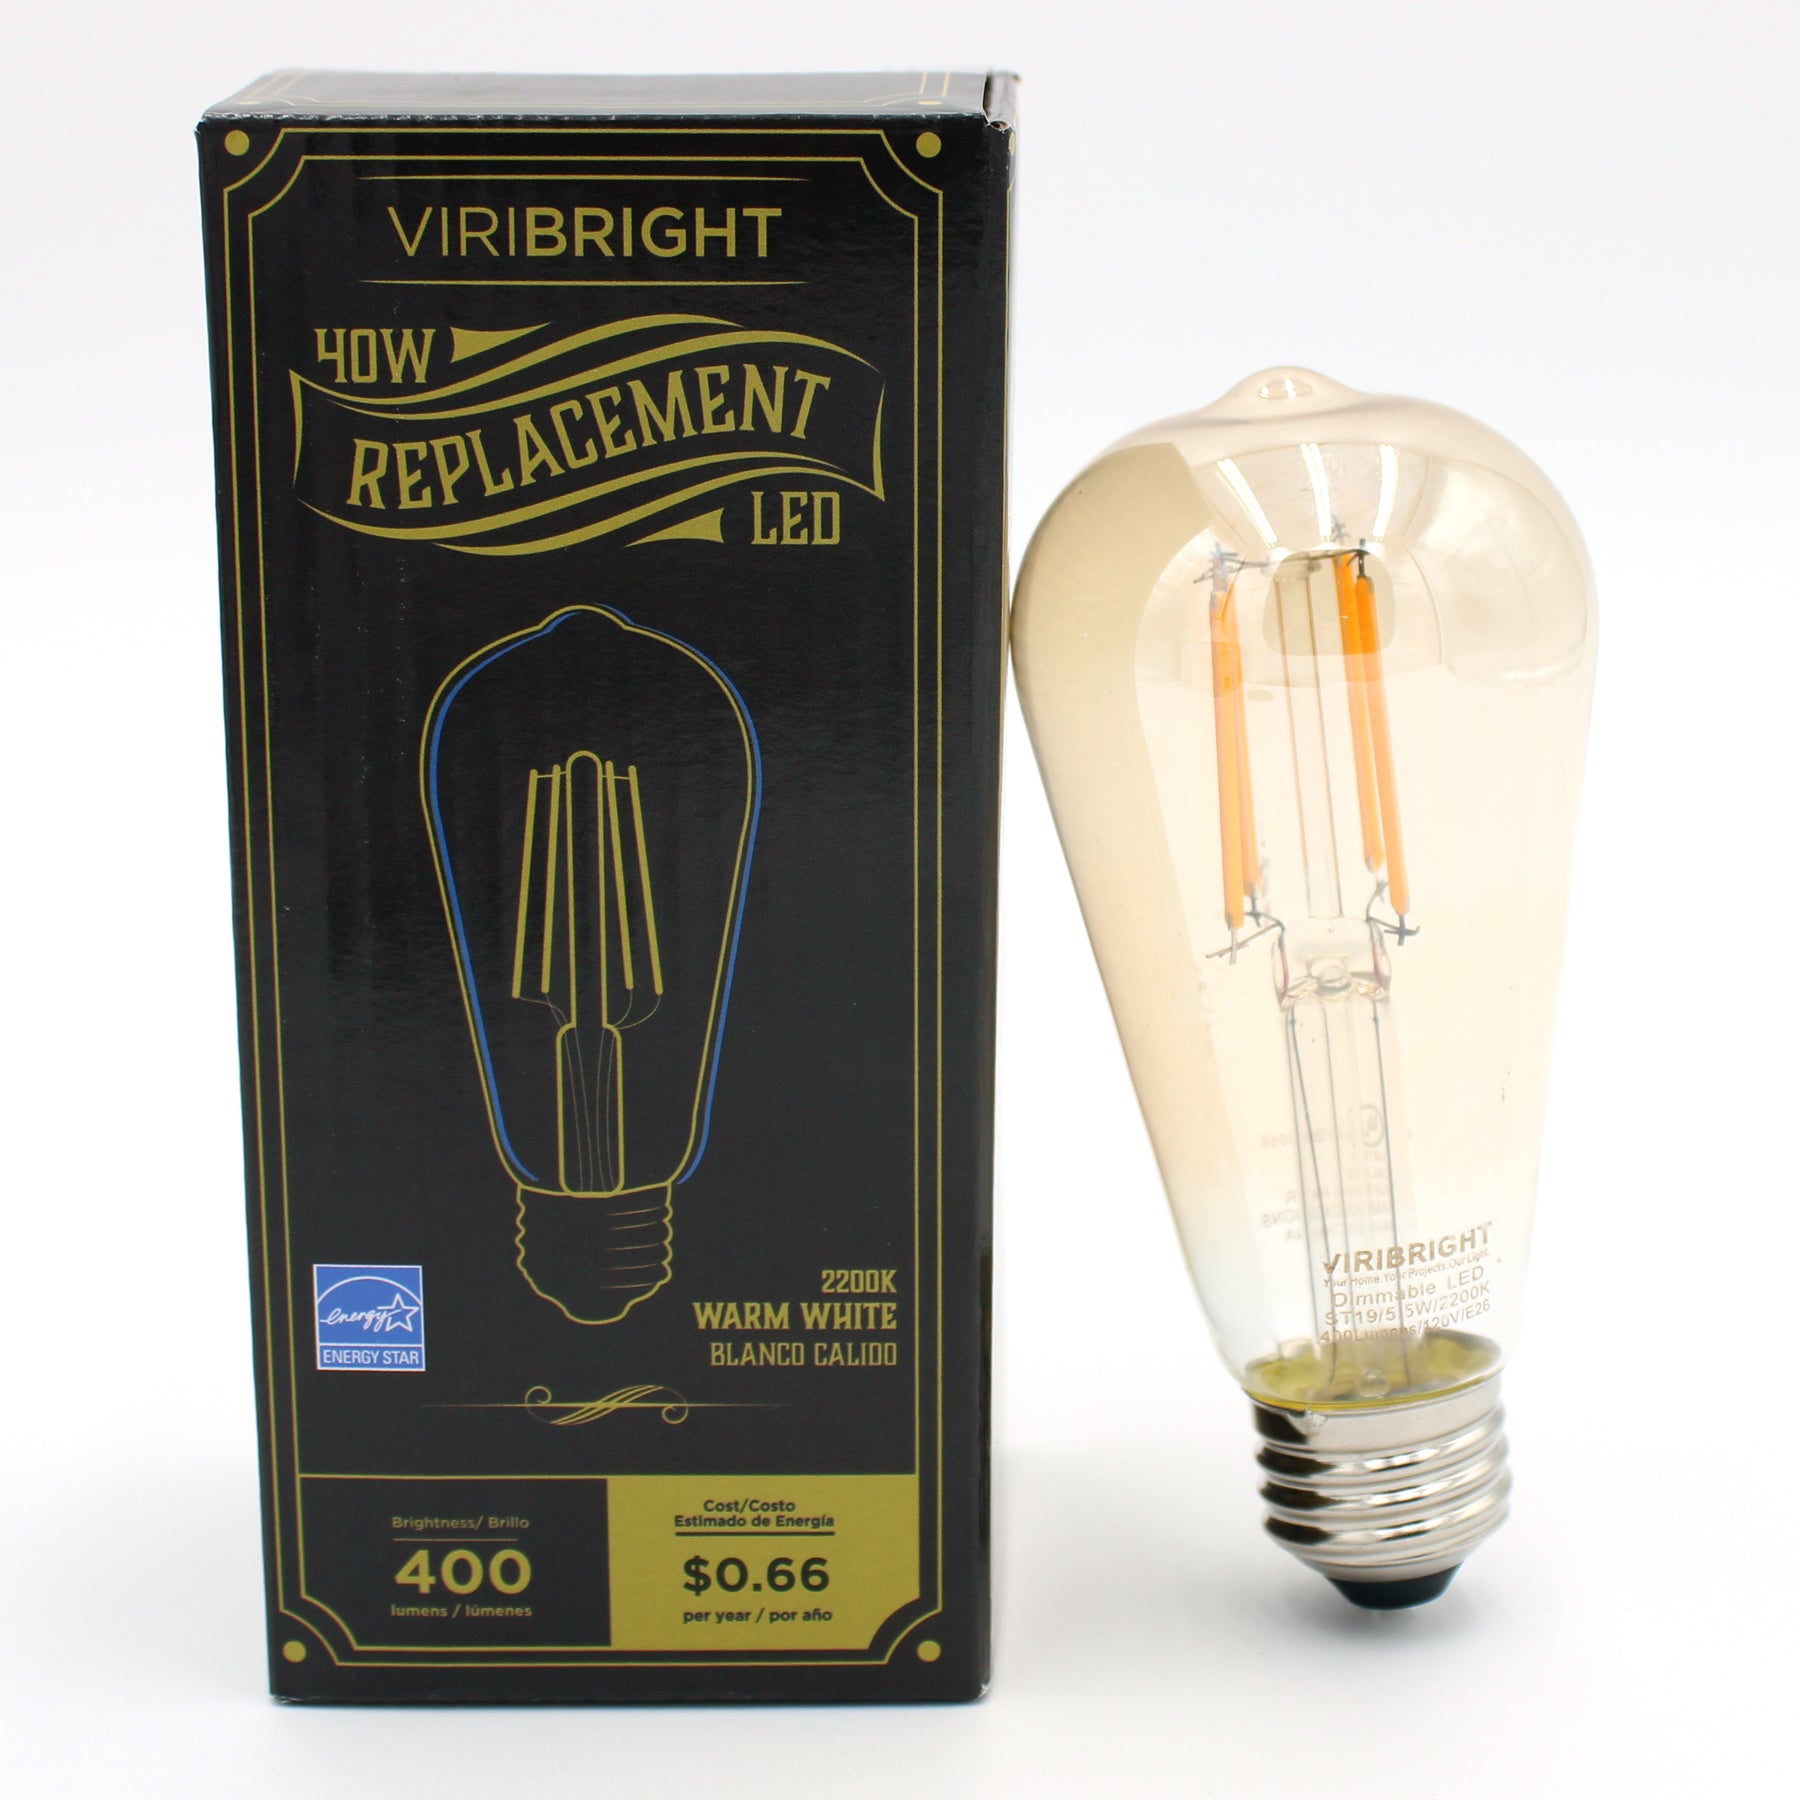 120v 40w china light bulb, 120v 40w china light bulb Suppliers and  Manufacturers at